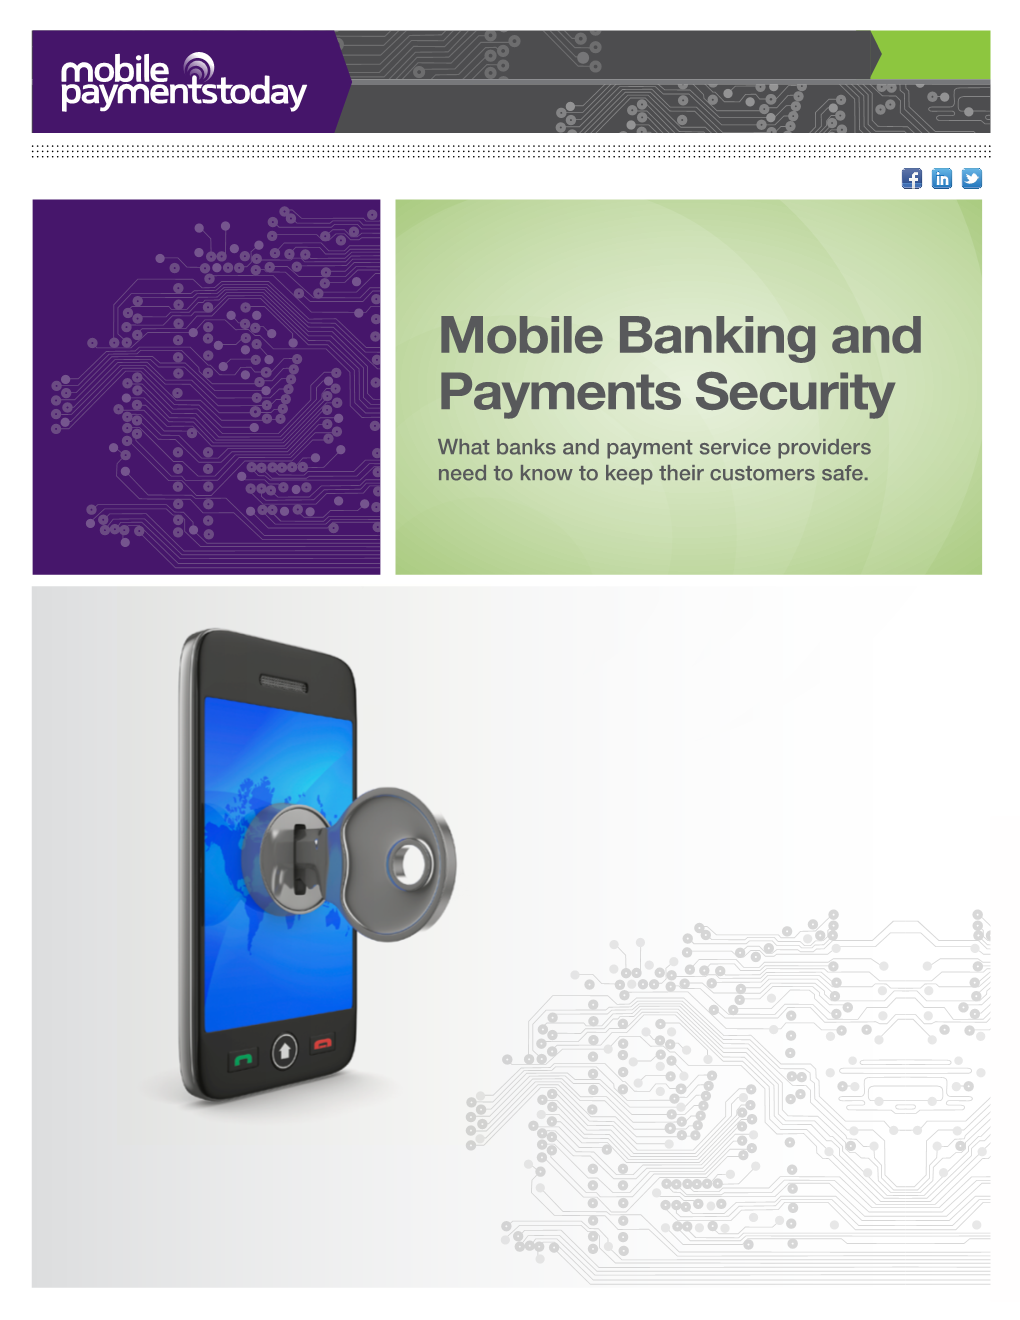 Mobile Banking and Payments Security What Banks and Payment Service Providers Need to Know to Keep Their Customers Safe